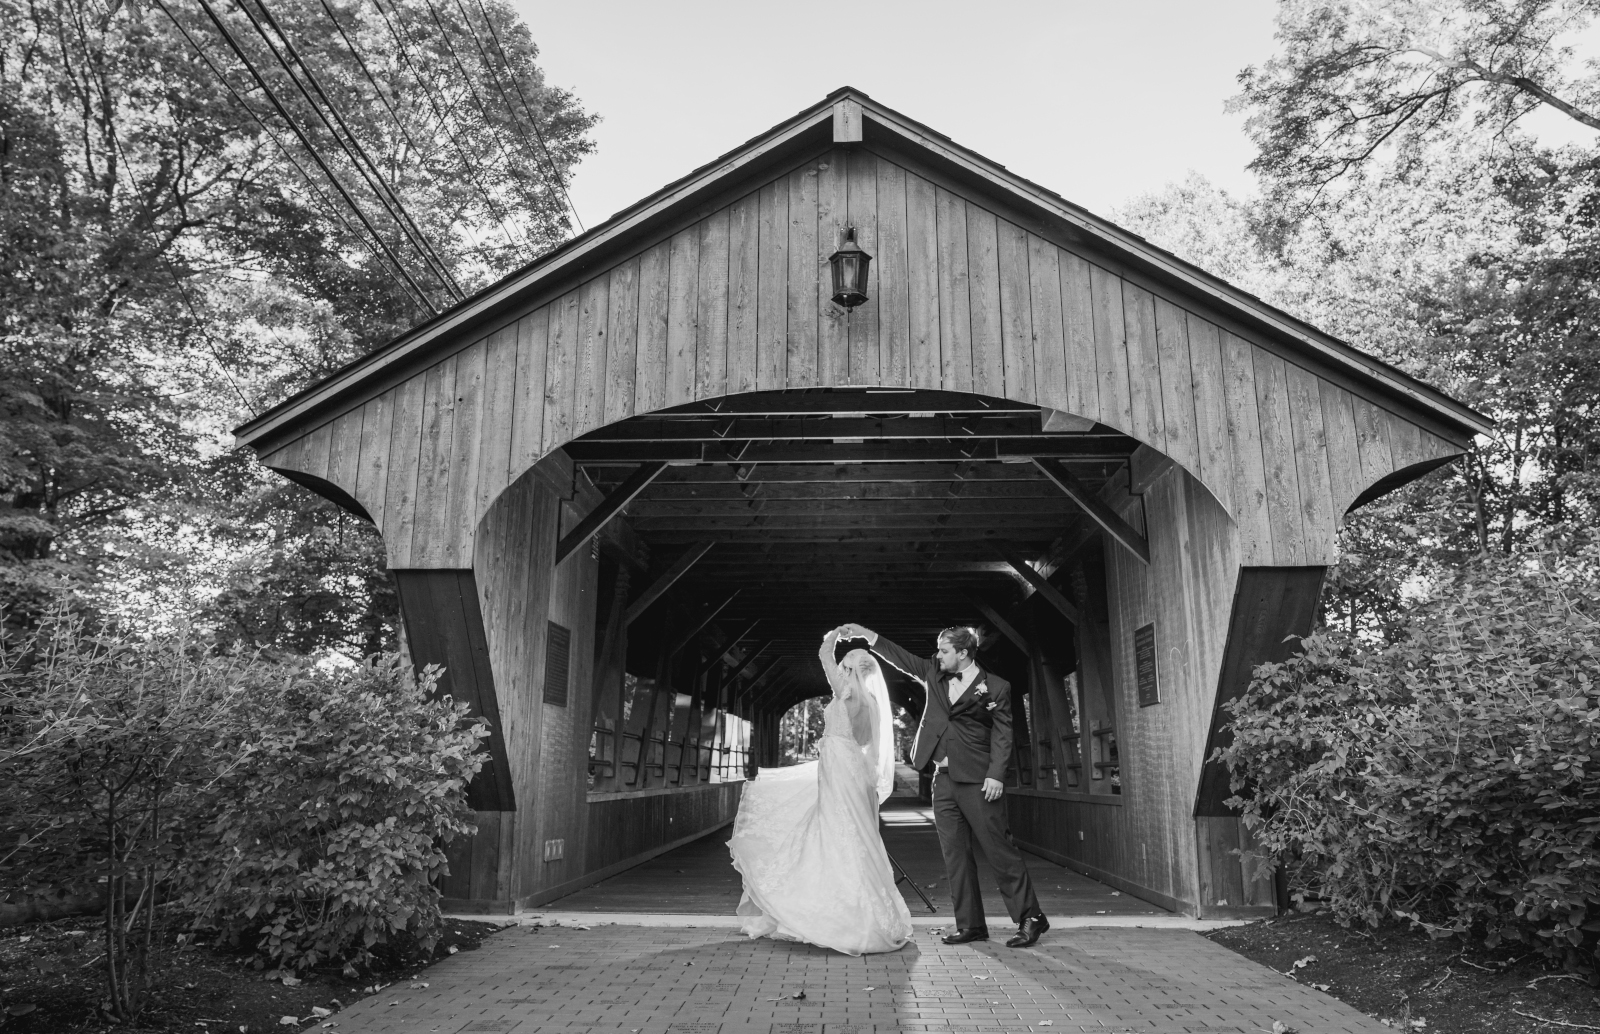 Bride and groom wedding portrait, dance, spin, backlight, wedding dress, classic, unique wedding photo, black and white, covered bridge, nature, trees, fall wedding, cute outdoor wedding ceremony at Grand Pacific Wedding Gardens